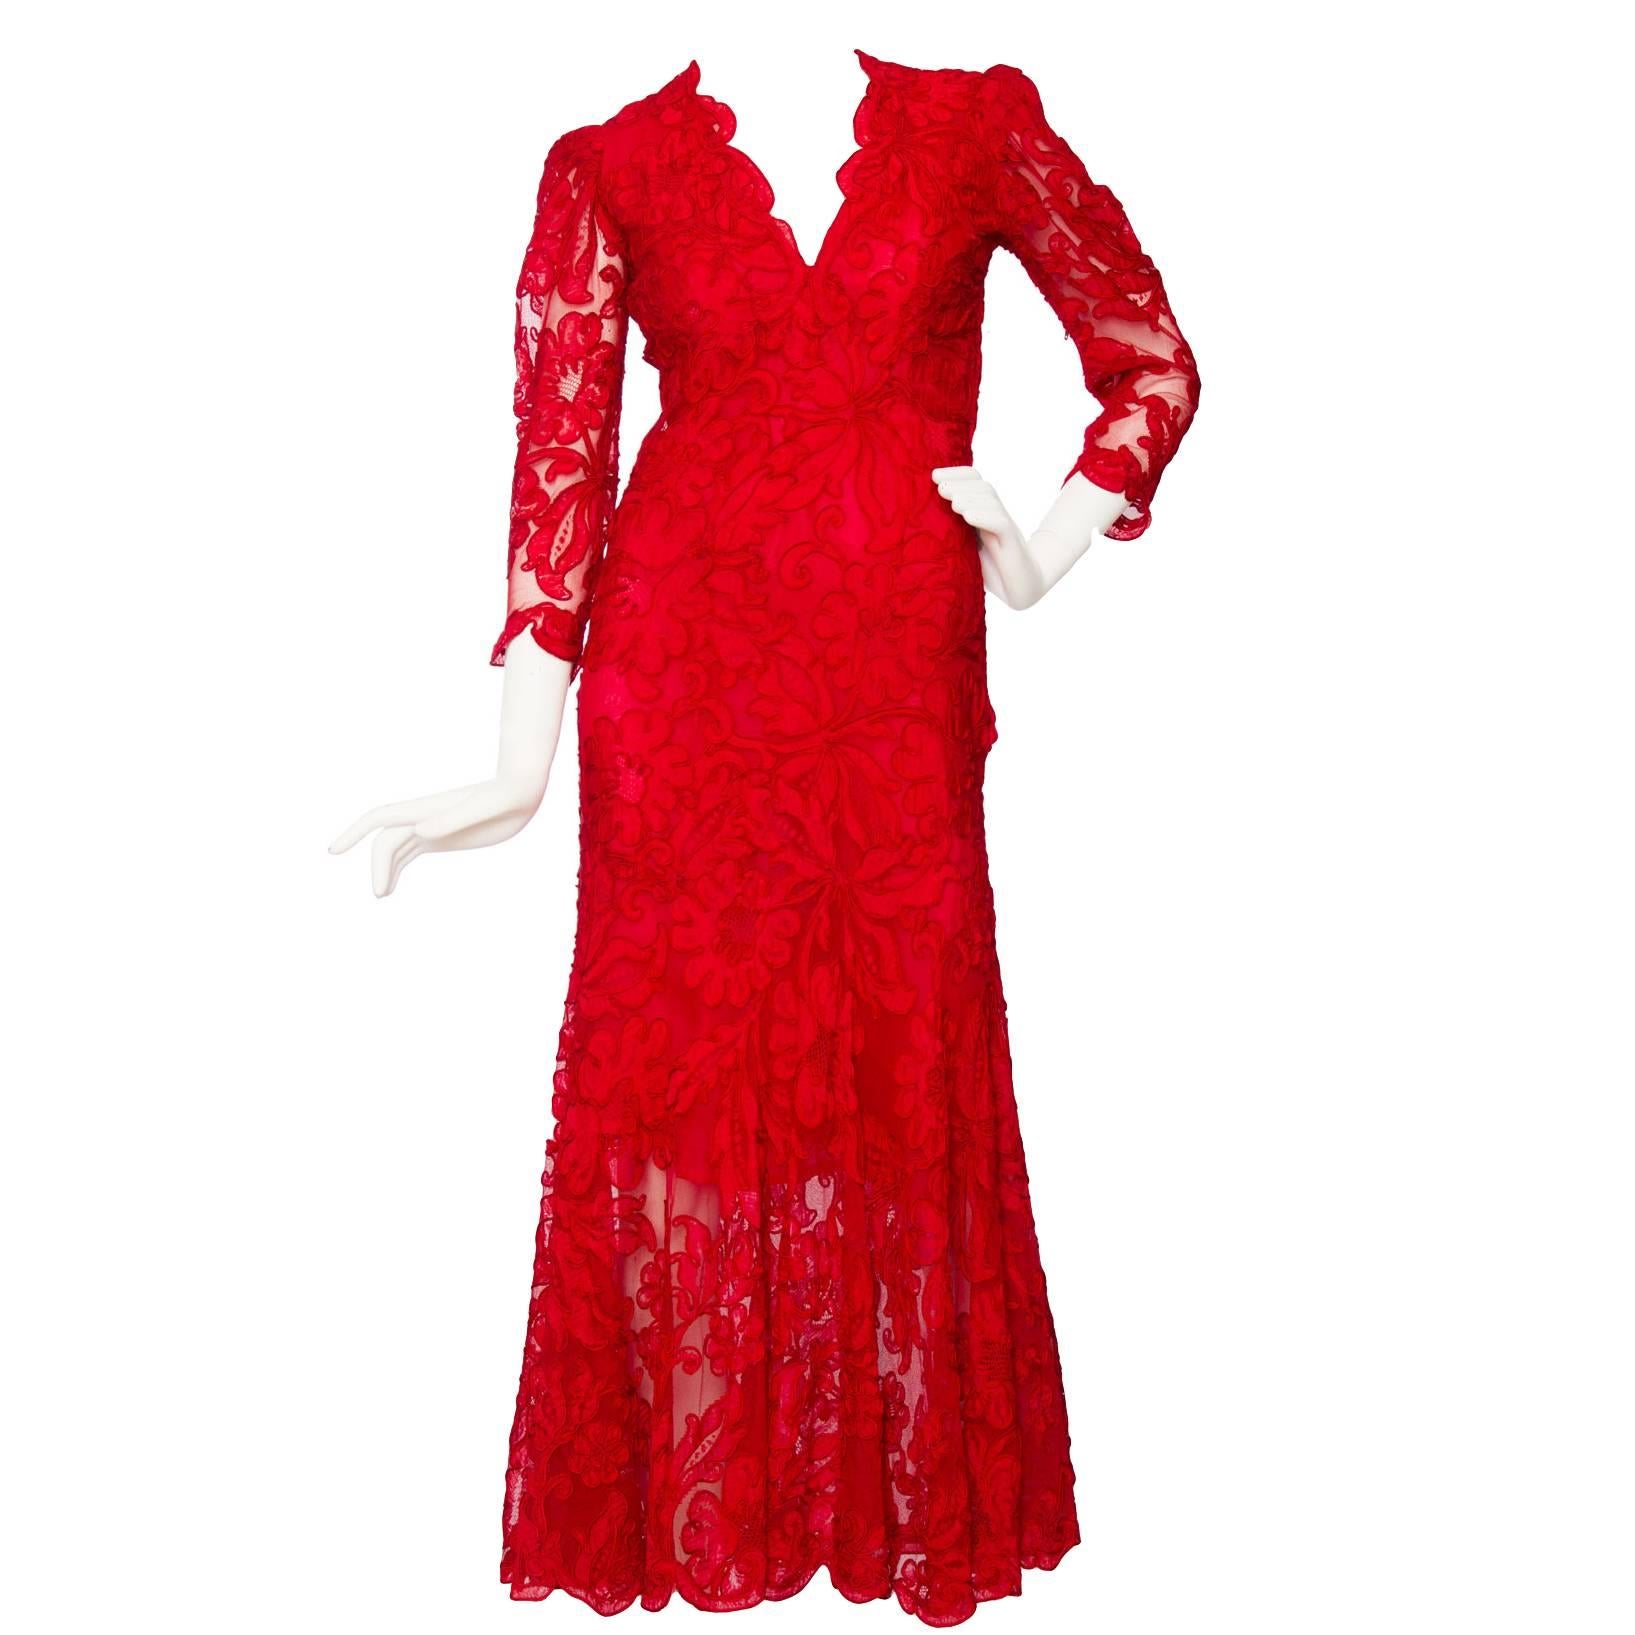 1983 Yves Saint Laurent Bright Red Haute Couture Evening Gown For Sale